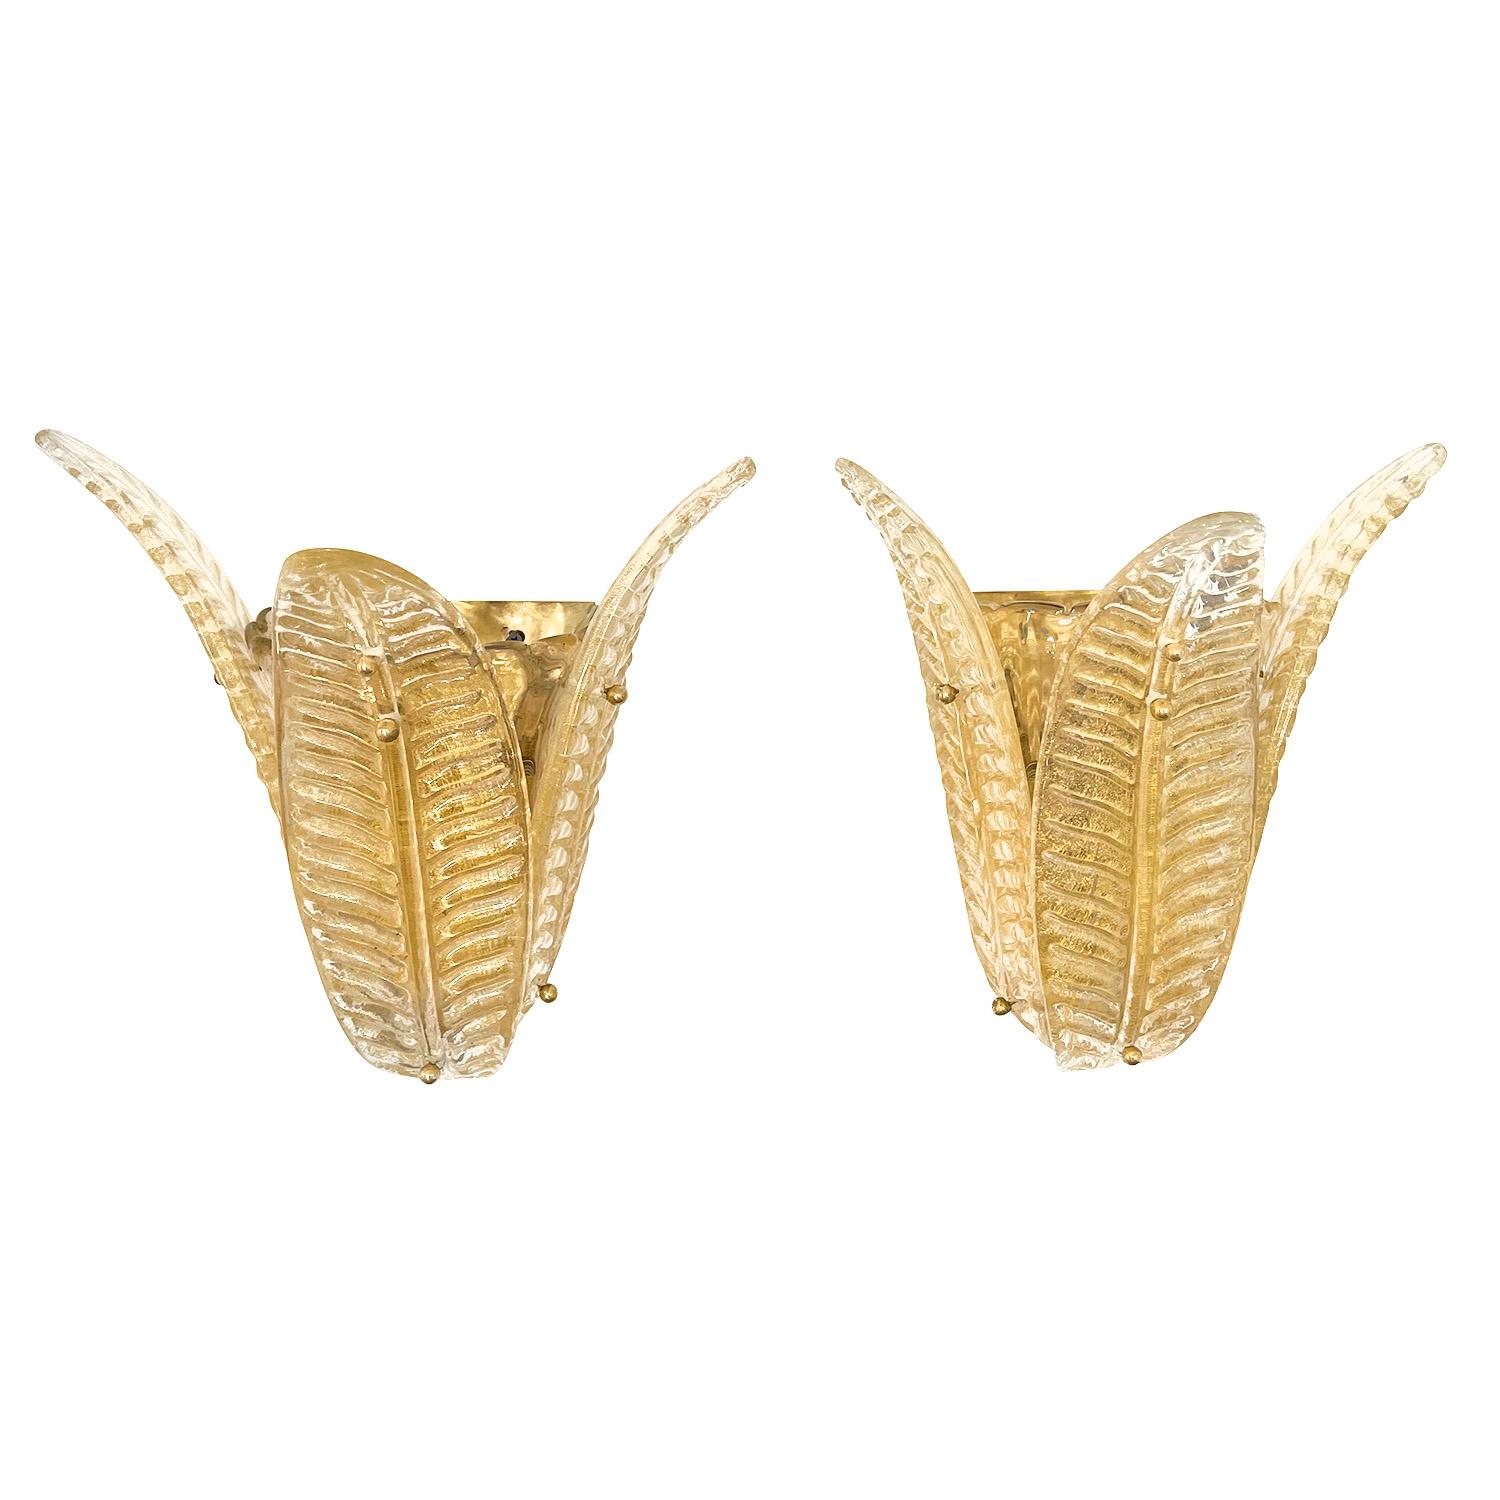 A smoked gold, vintage Mid-Century Modern Italian pair of wall appliques made of hand blown Murano glass Gold Sommerso, supported by a brass structure. Each of the wall fixtures is composed of three leafs and a two light socket, in good condition.